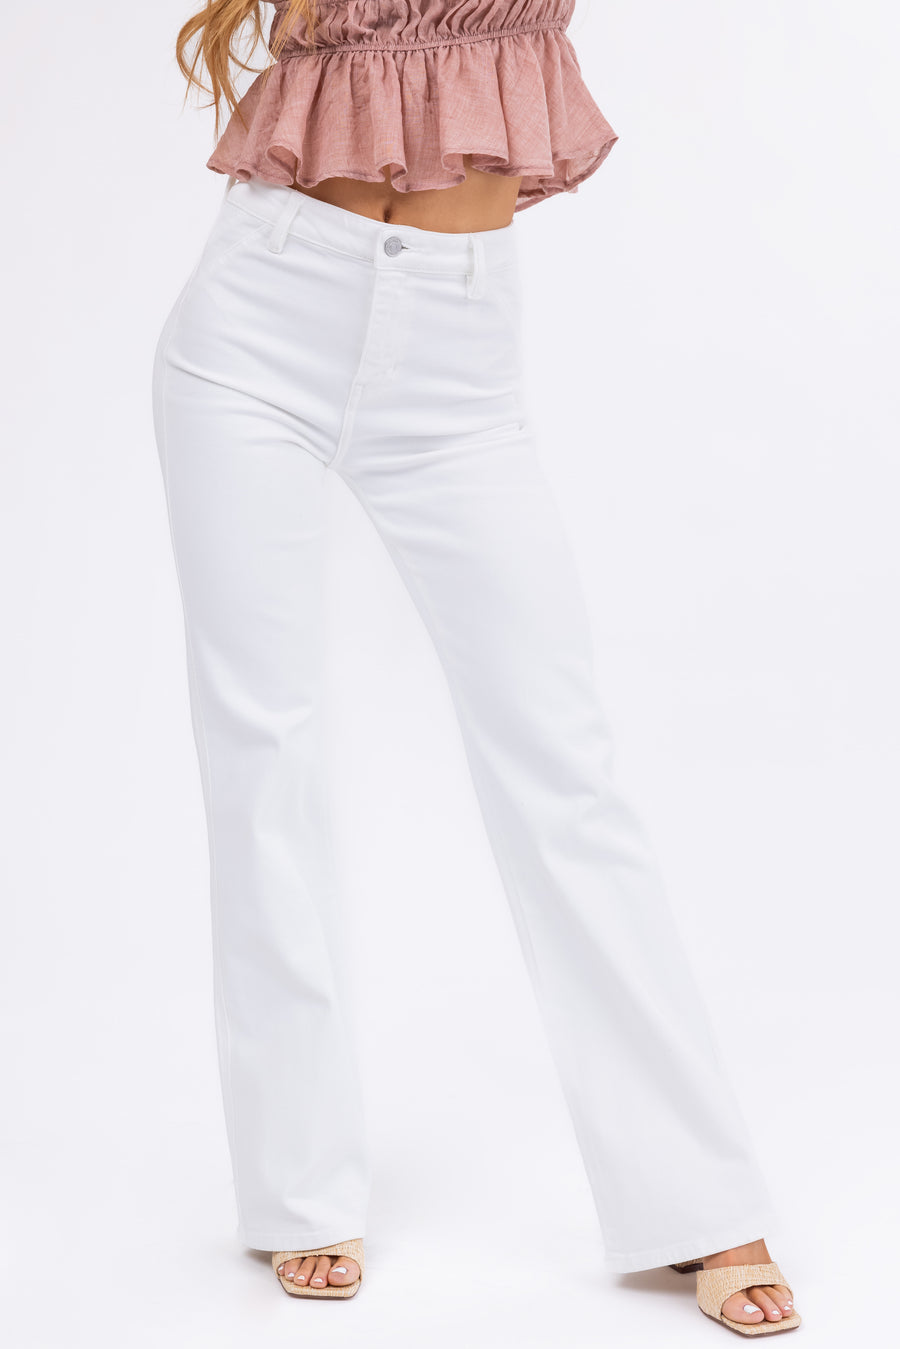 KanCan Off White Ultra High Rise Flare Jeans